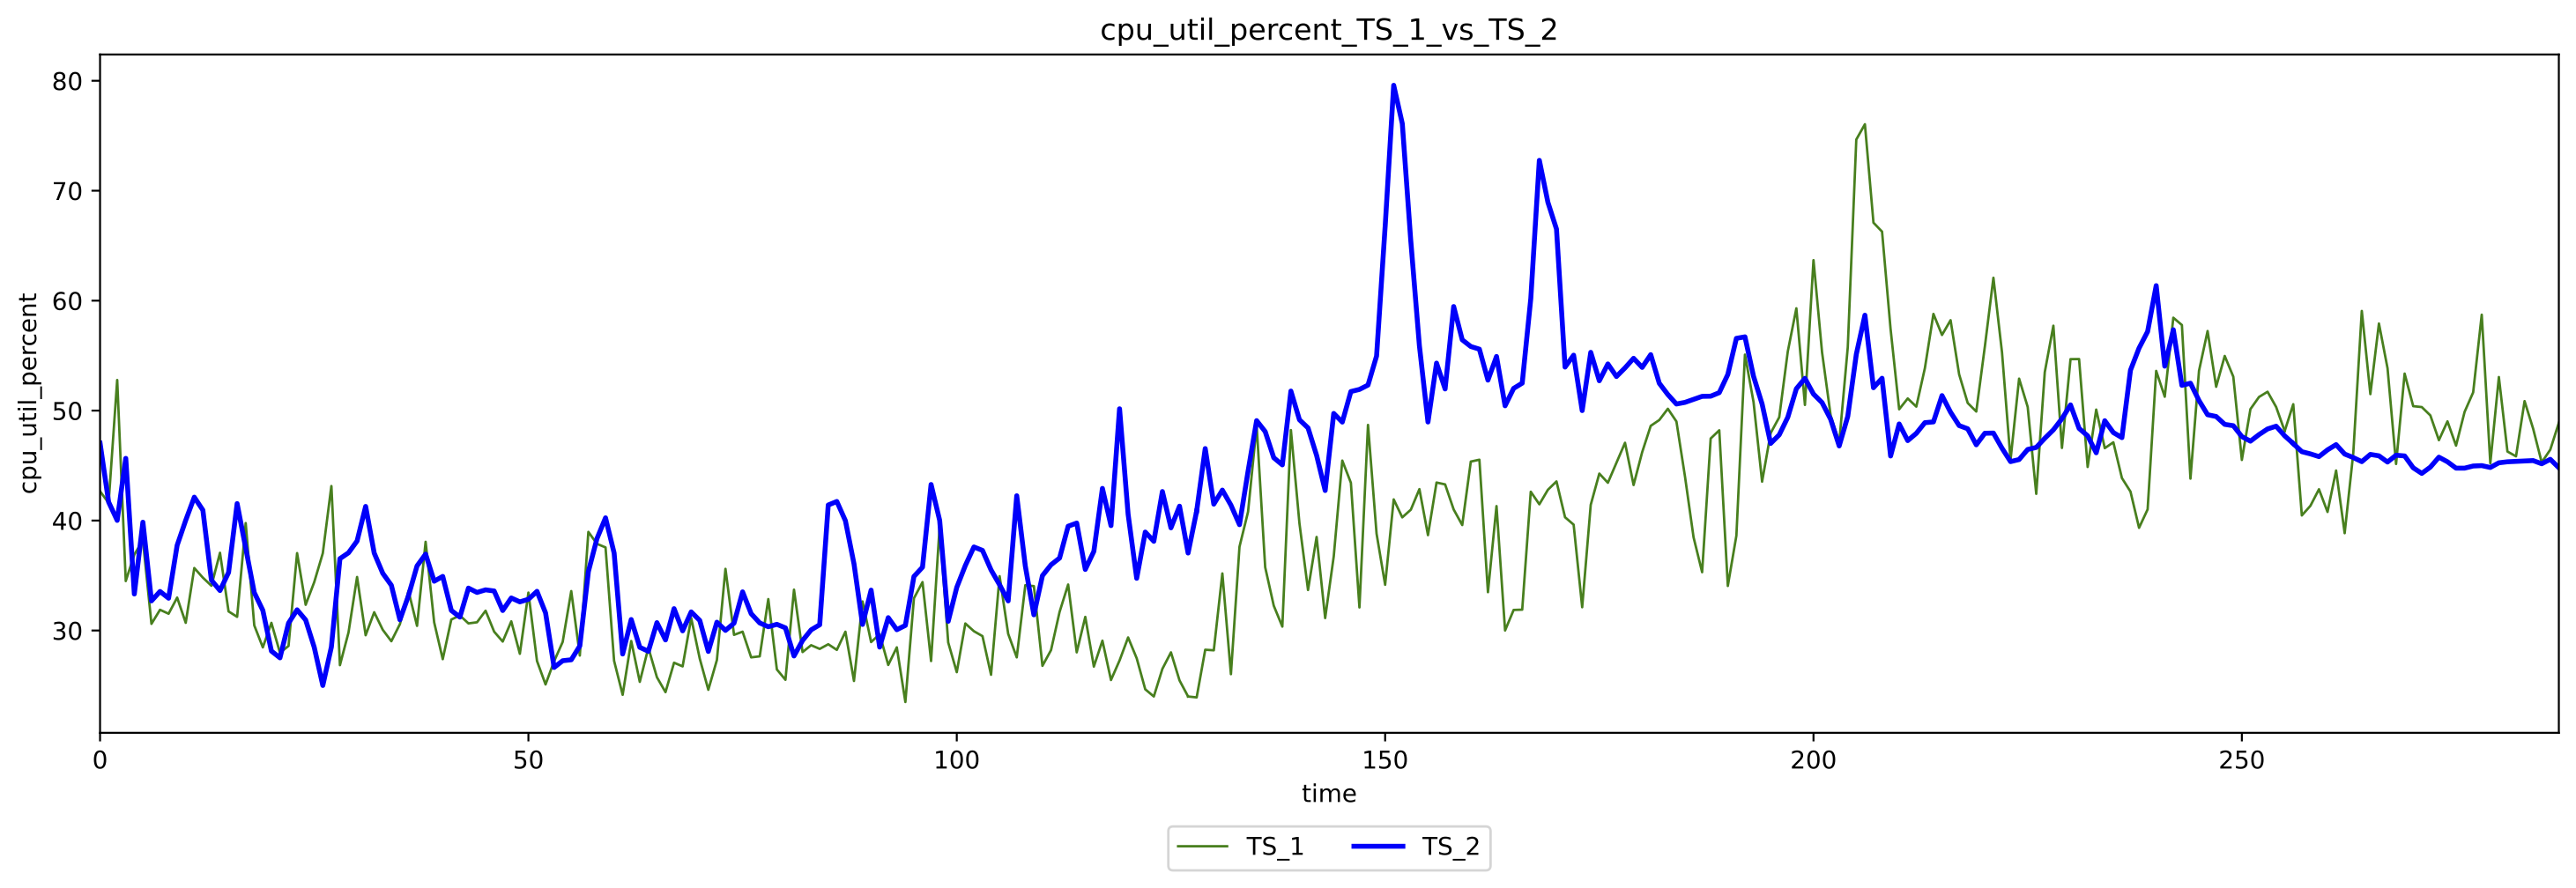 2D Figure for used CPU percentage